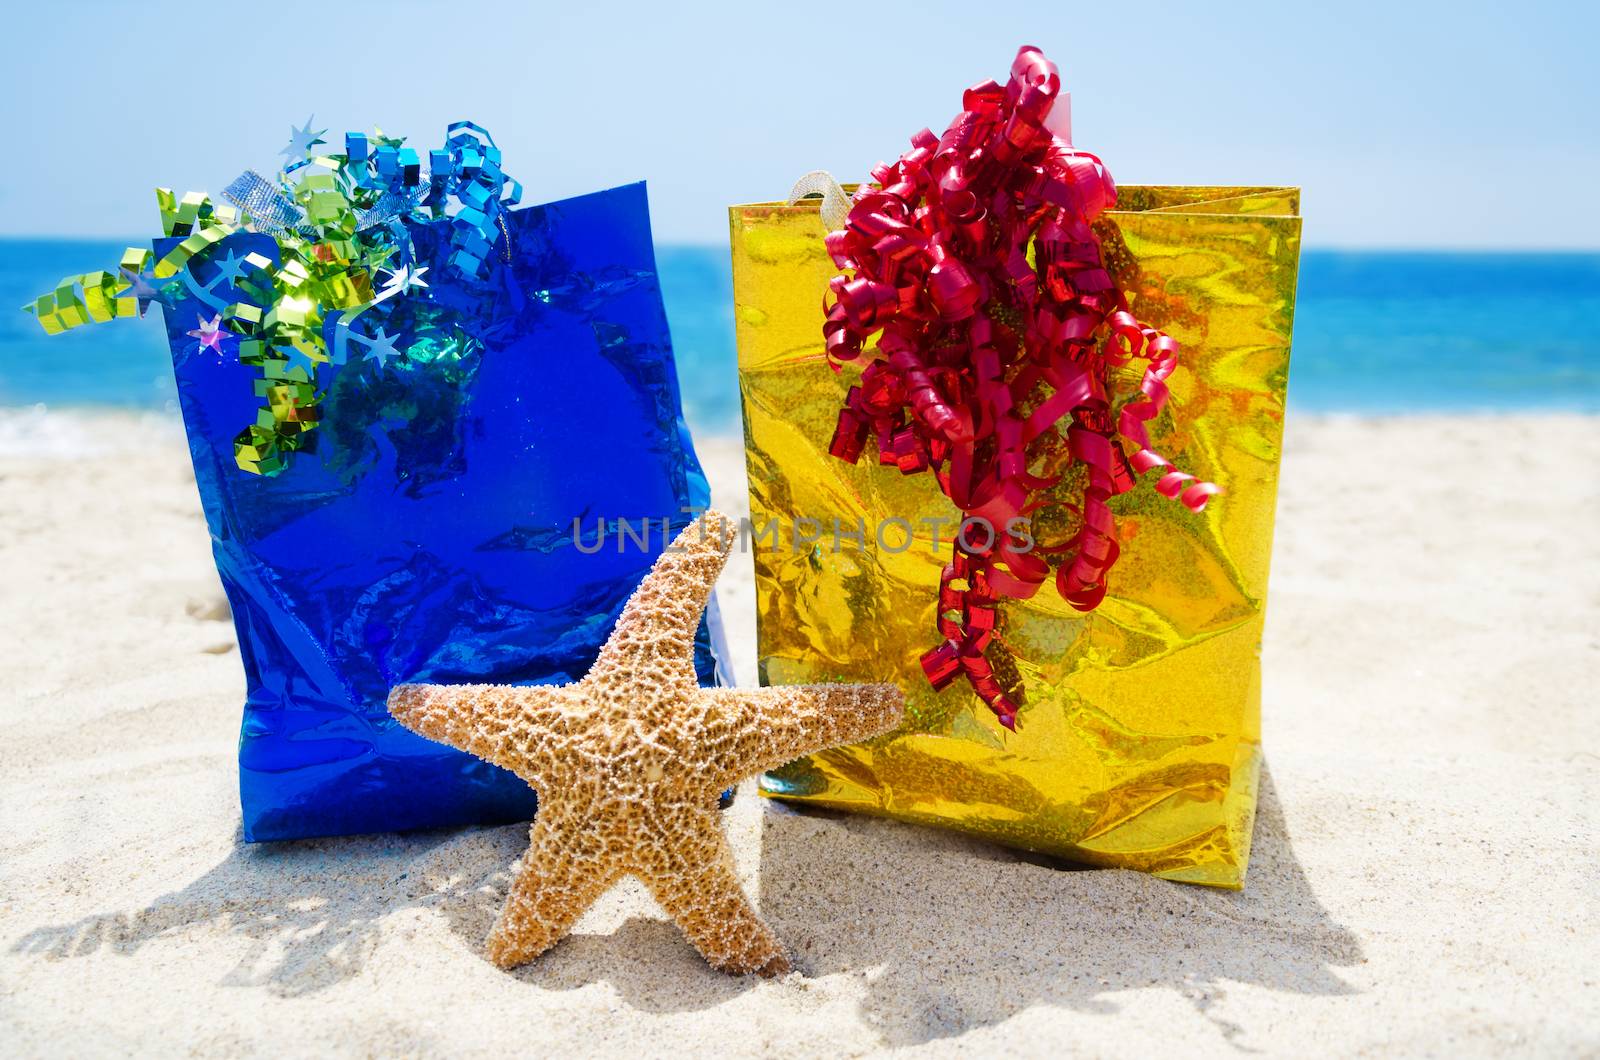 Starfish with gift bags on the beach - holiday concept by EllenSmile